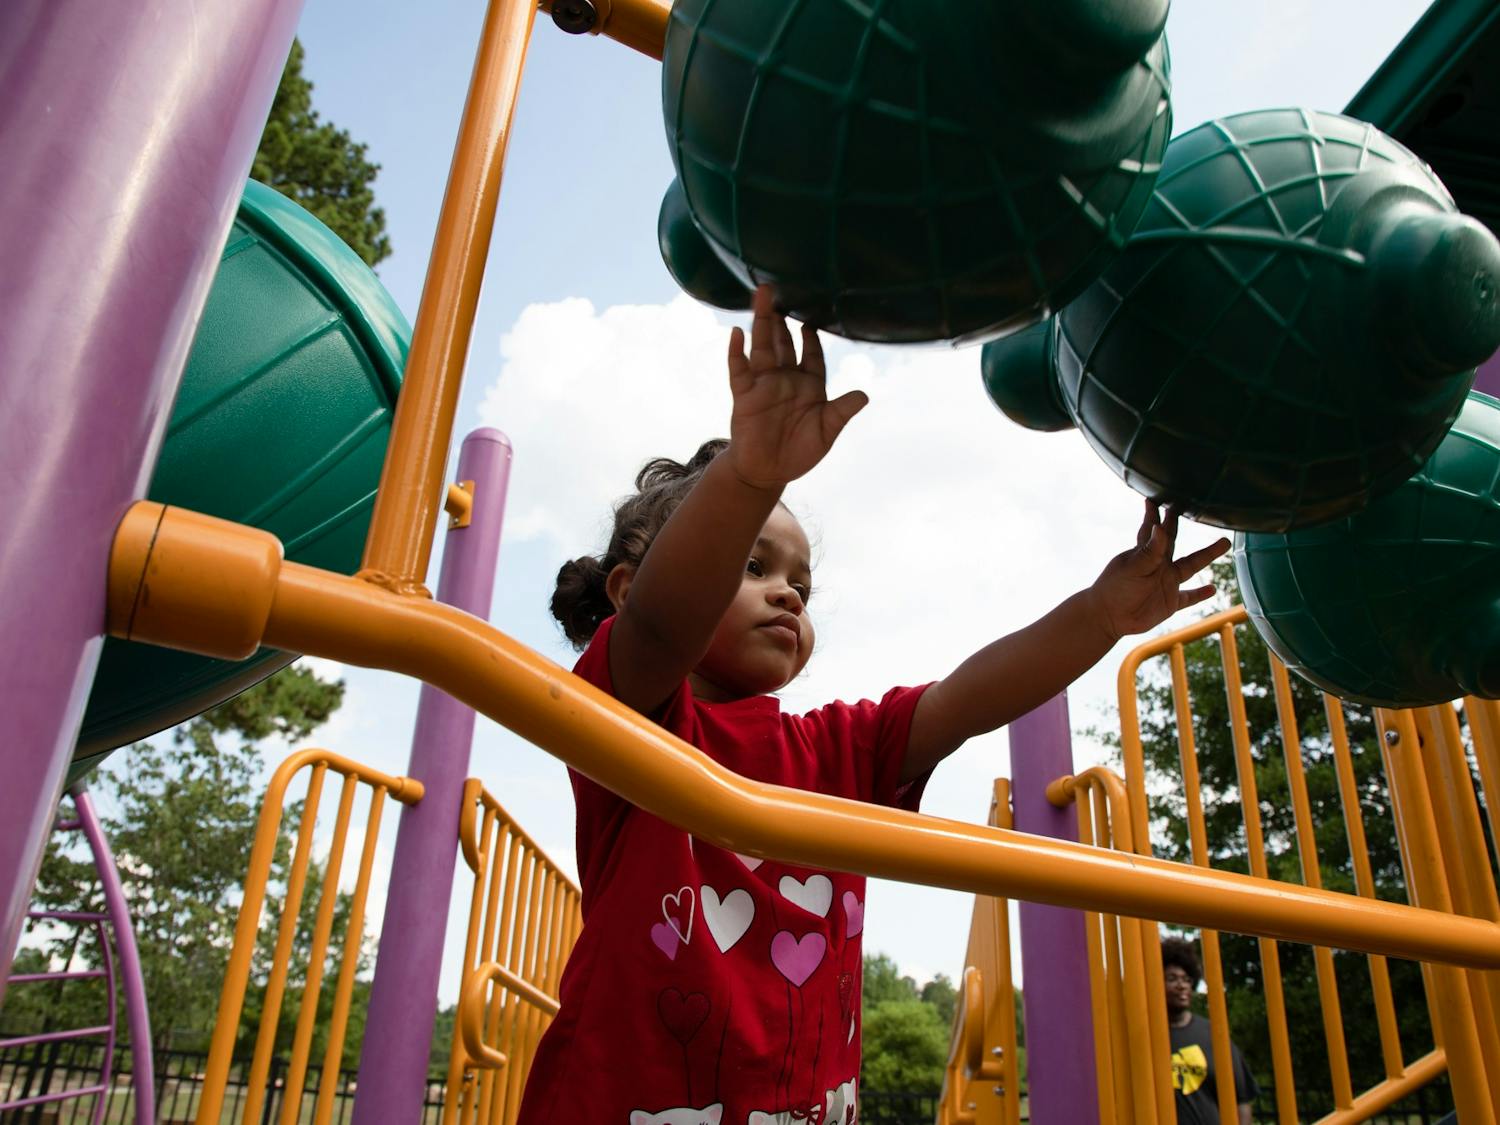 Marsaline Judd plays on the playground at Southern Community Park on July 6, 2022.